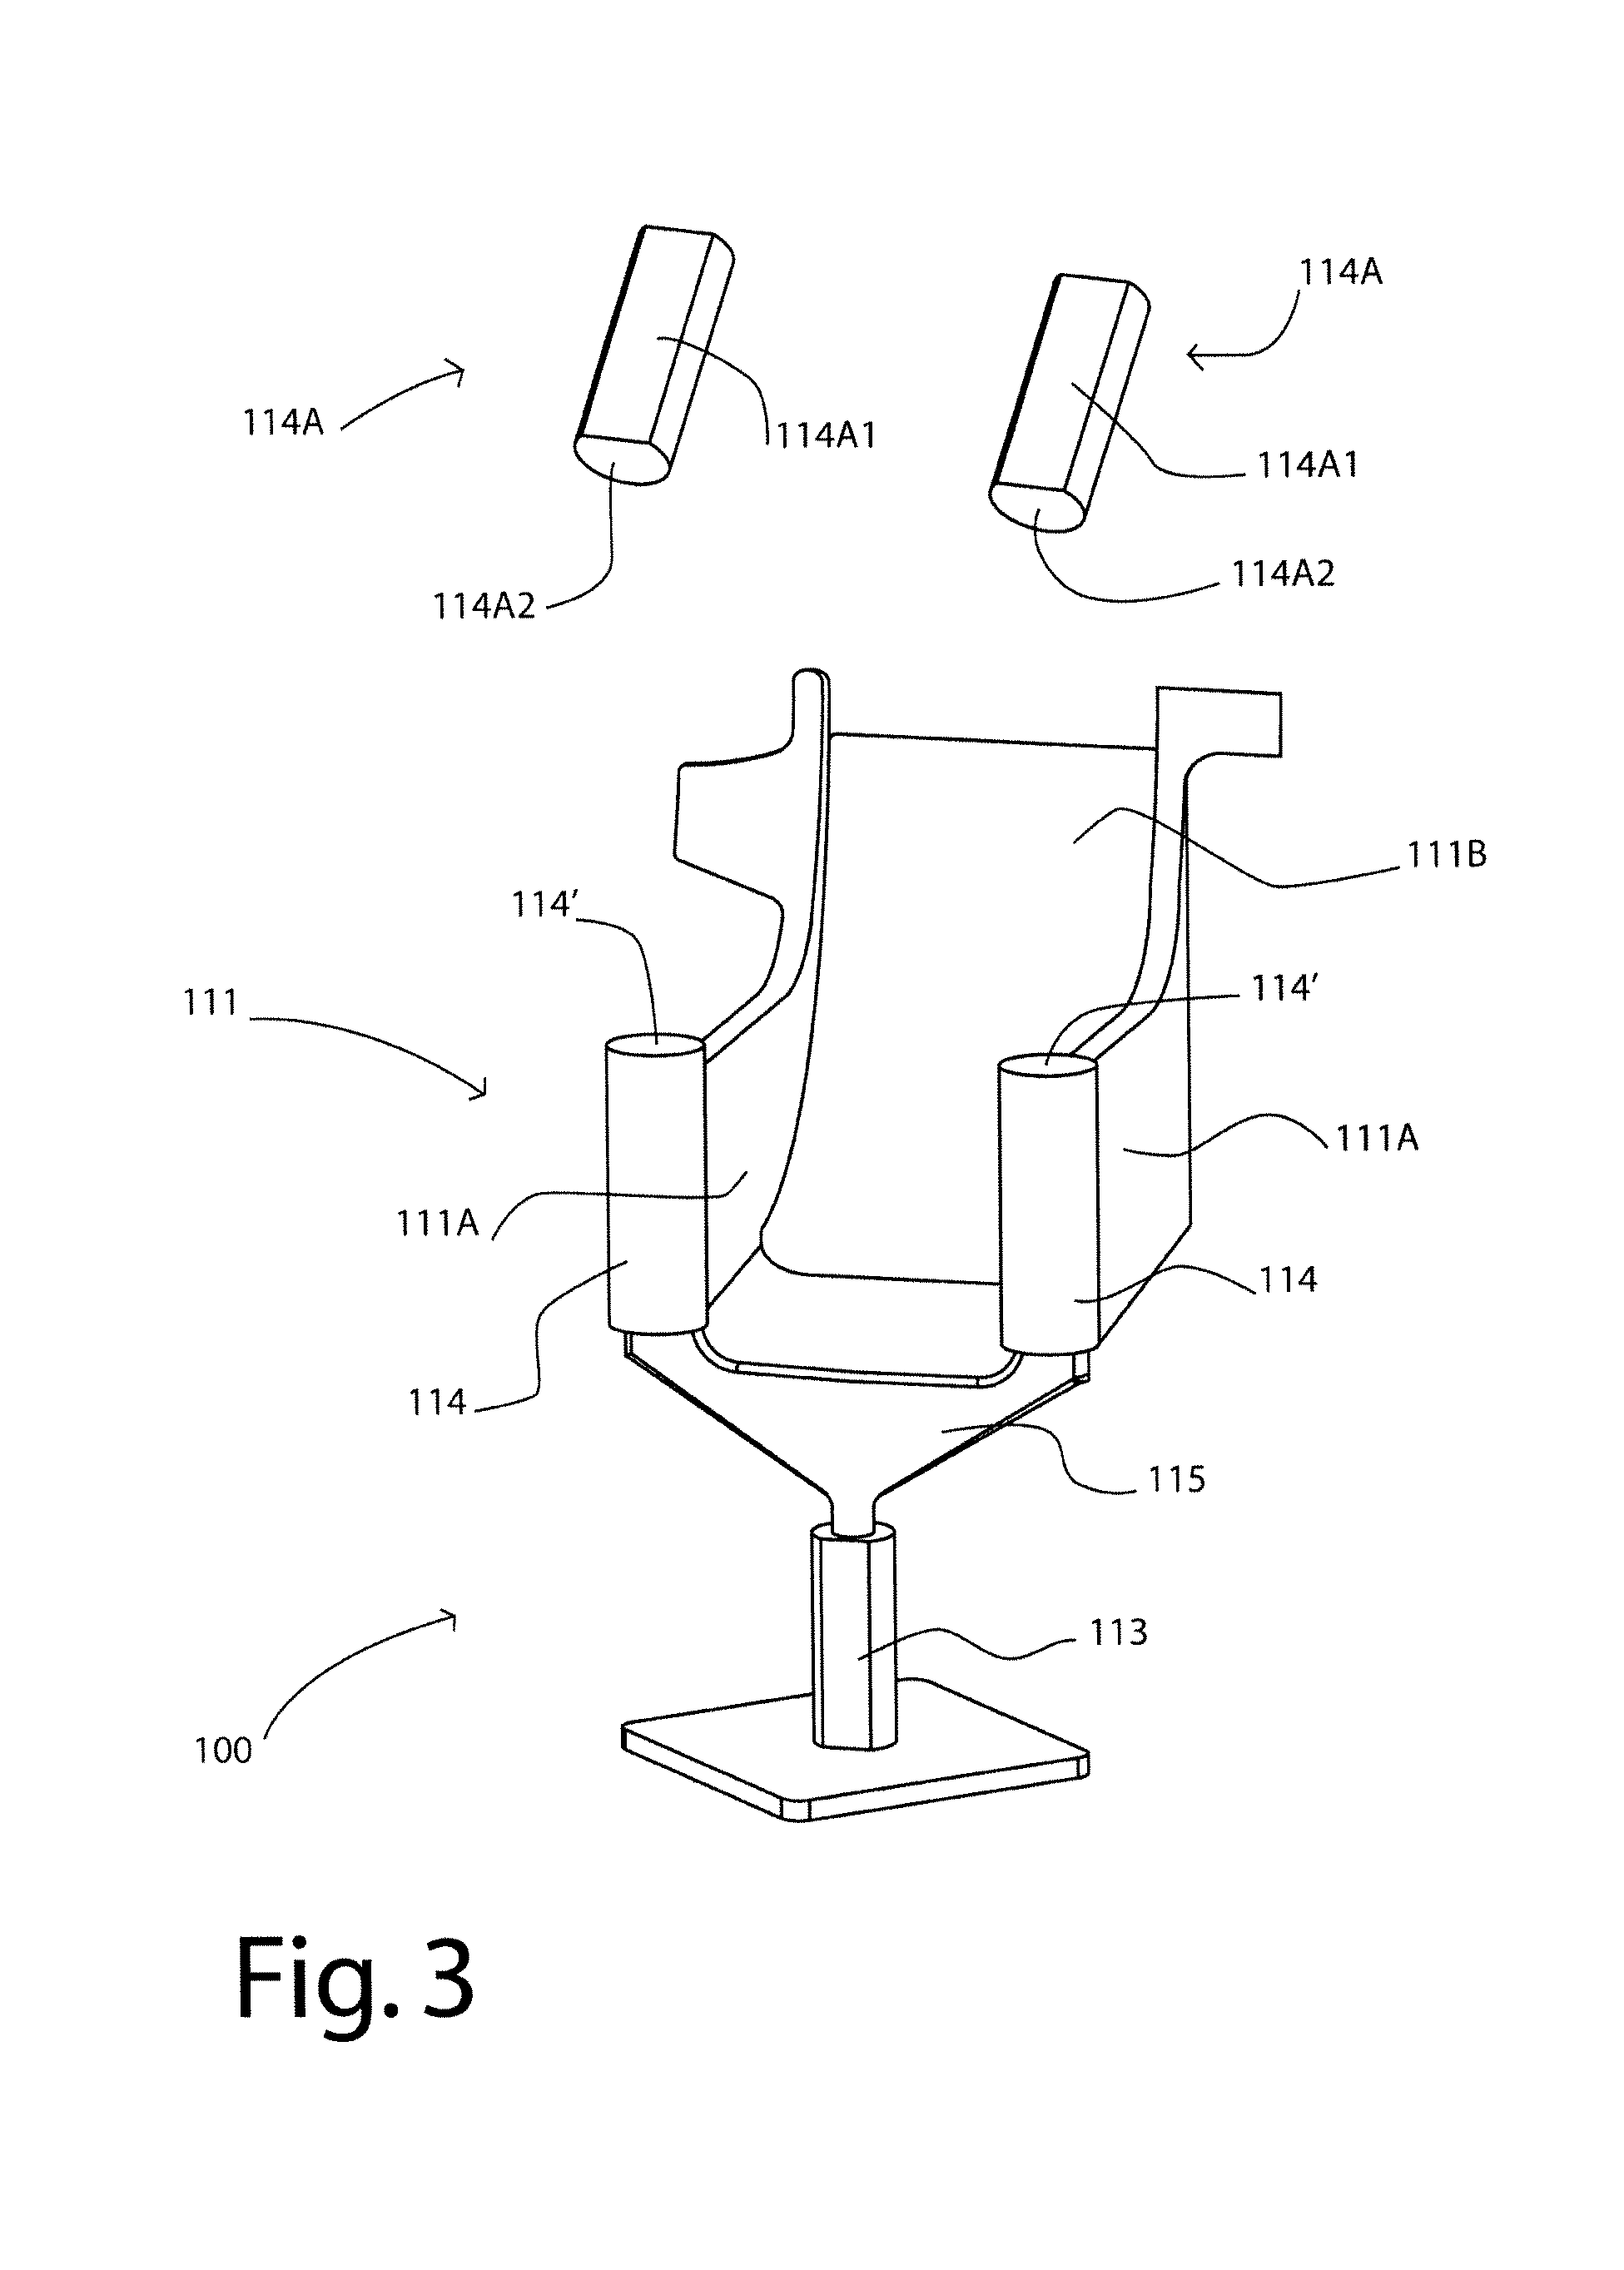 Process for manufacturing single-crystal seeds simultaneously with the casting of single-crystal parts